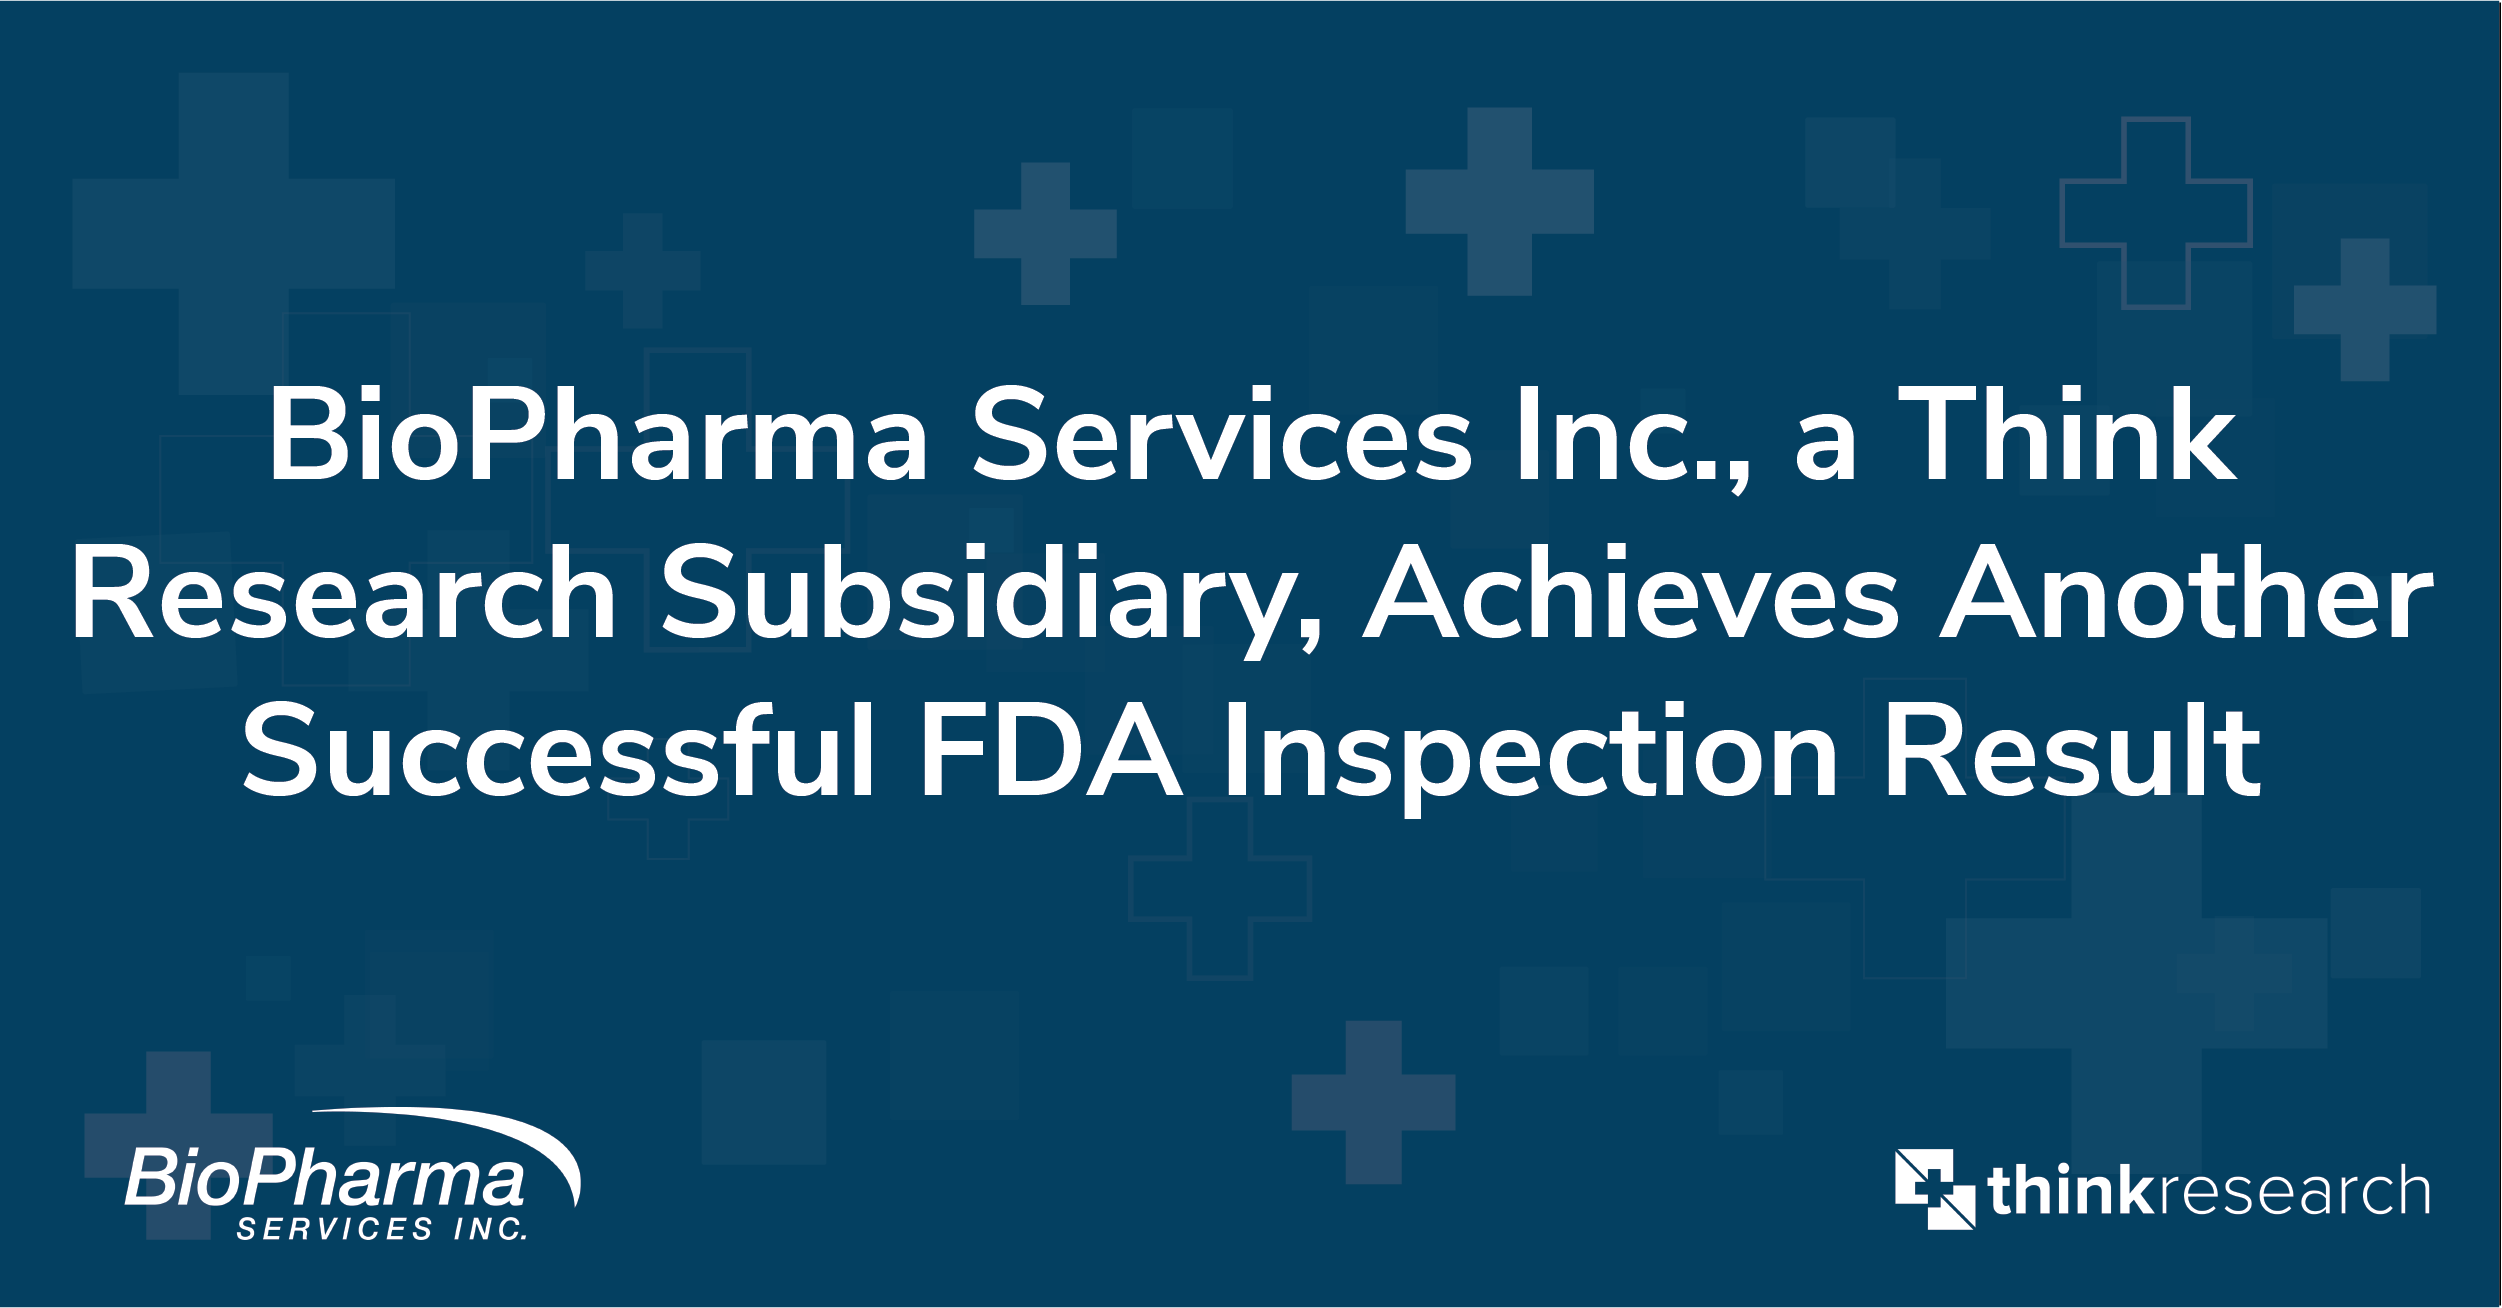 BioPharma Services Inc., a Think Research Subsidiary, Achieves Another Successful FDA Inspection Result press release image